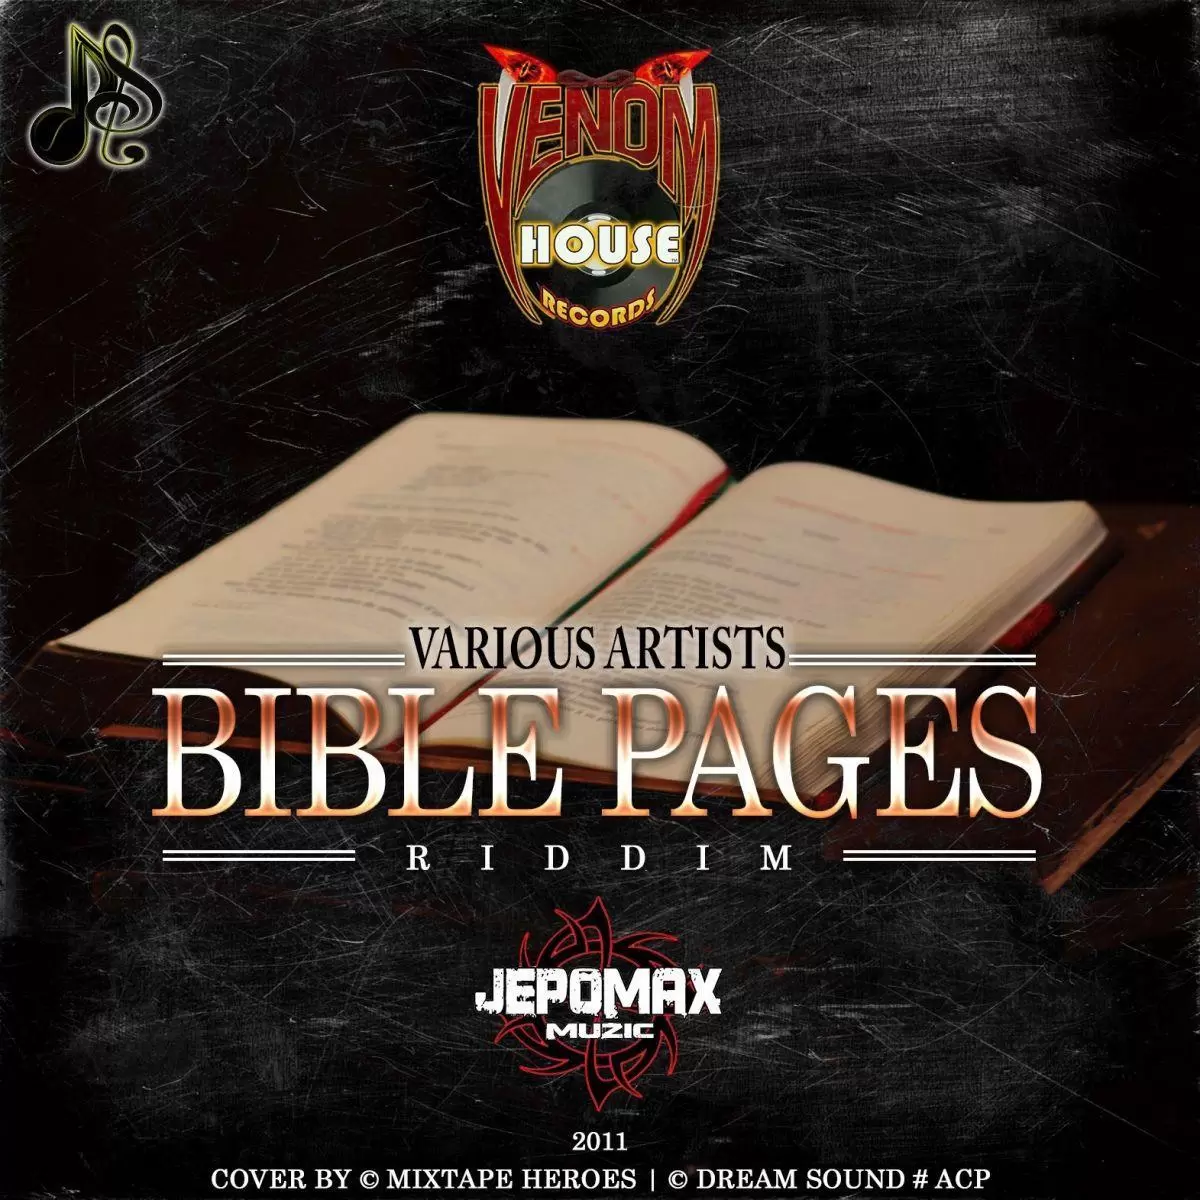 00 - bible pages riddim - 2011